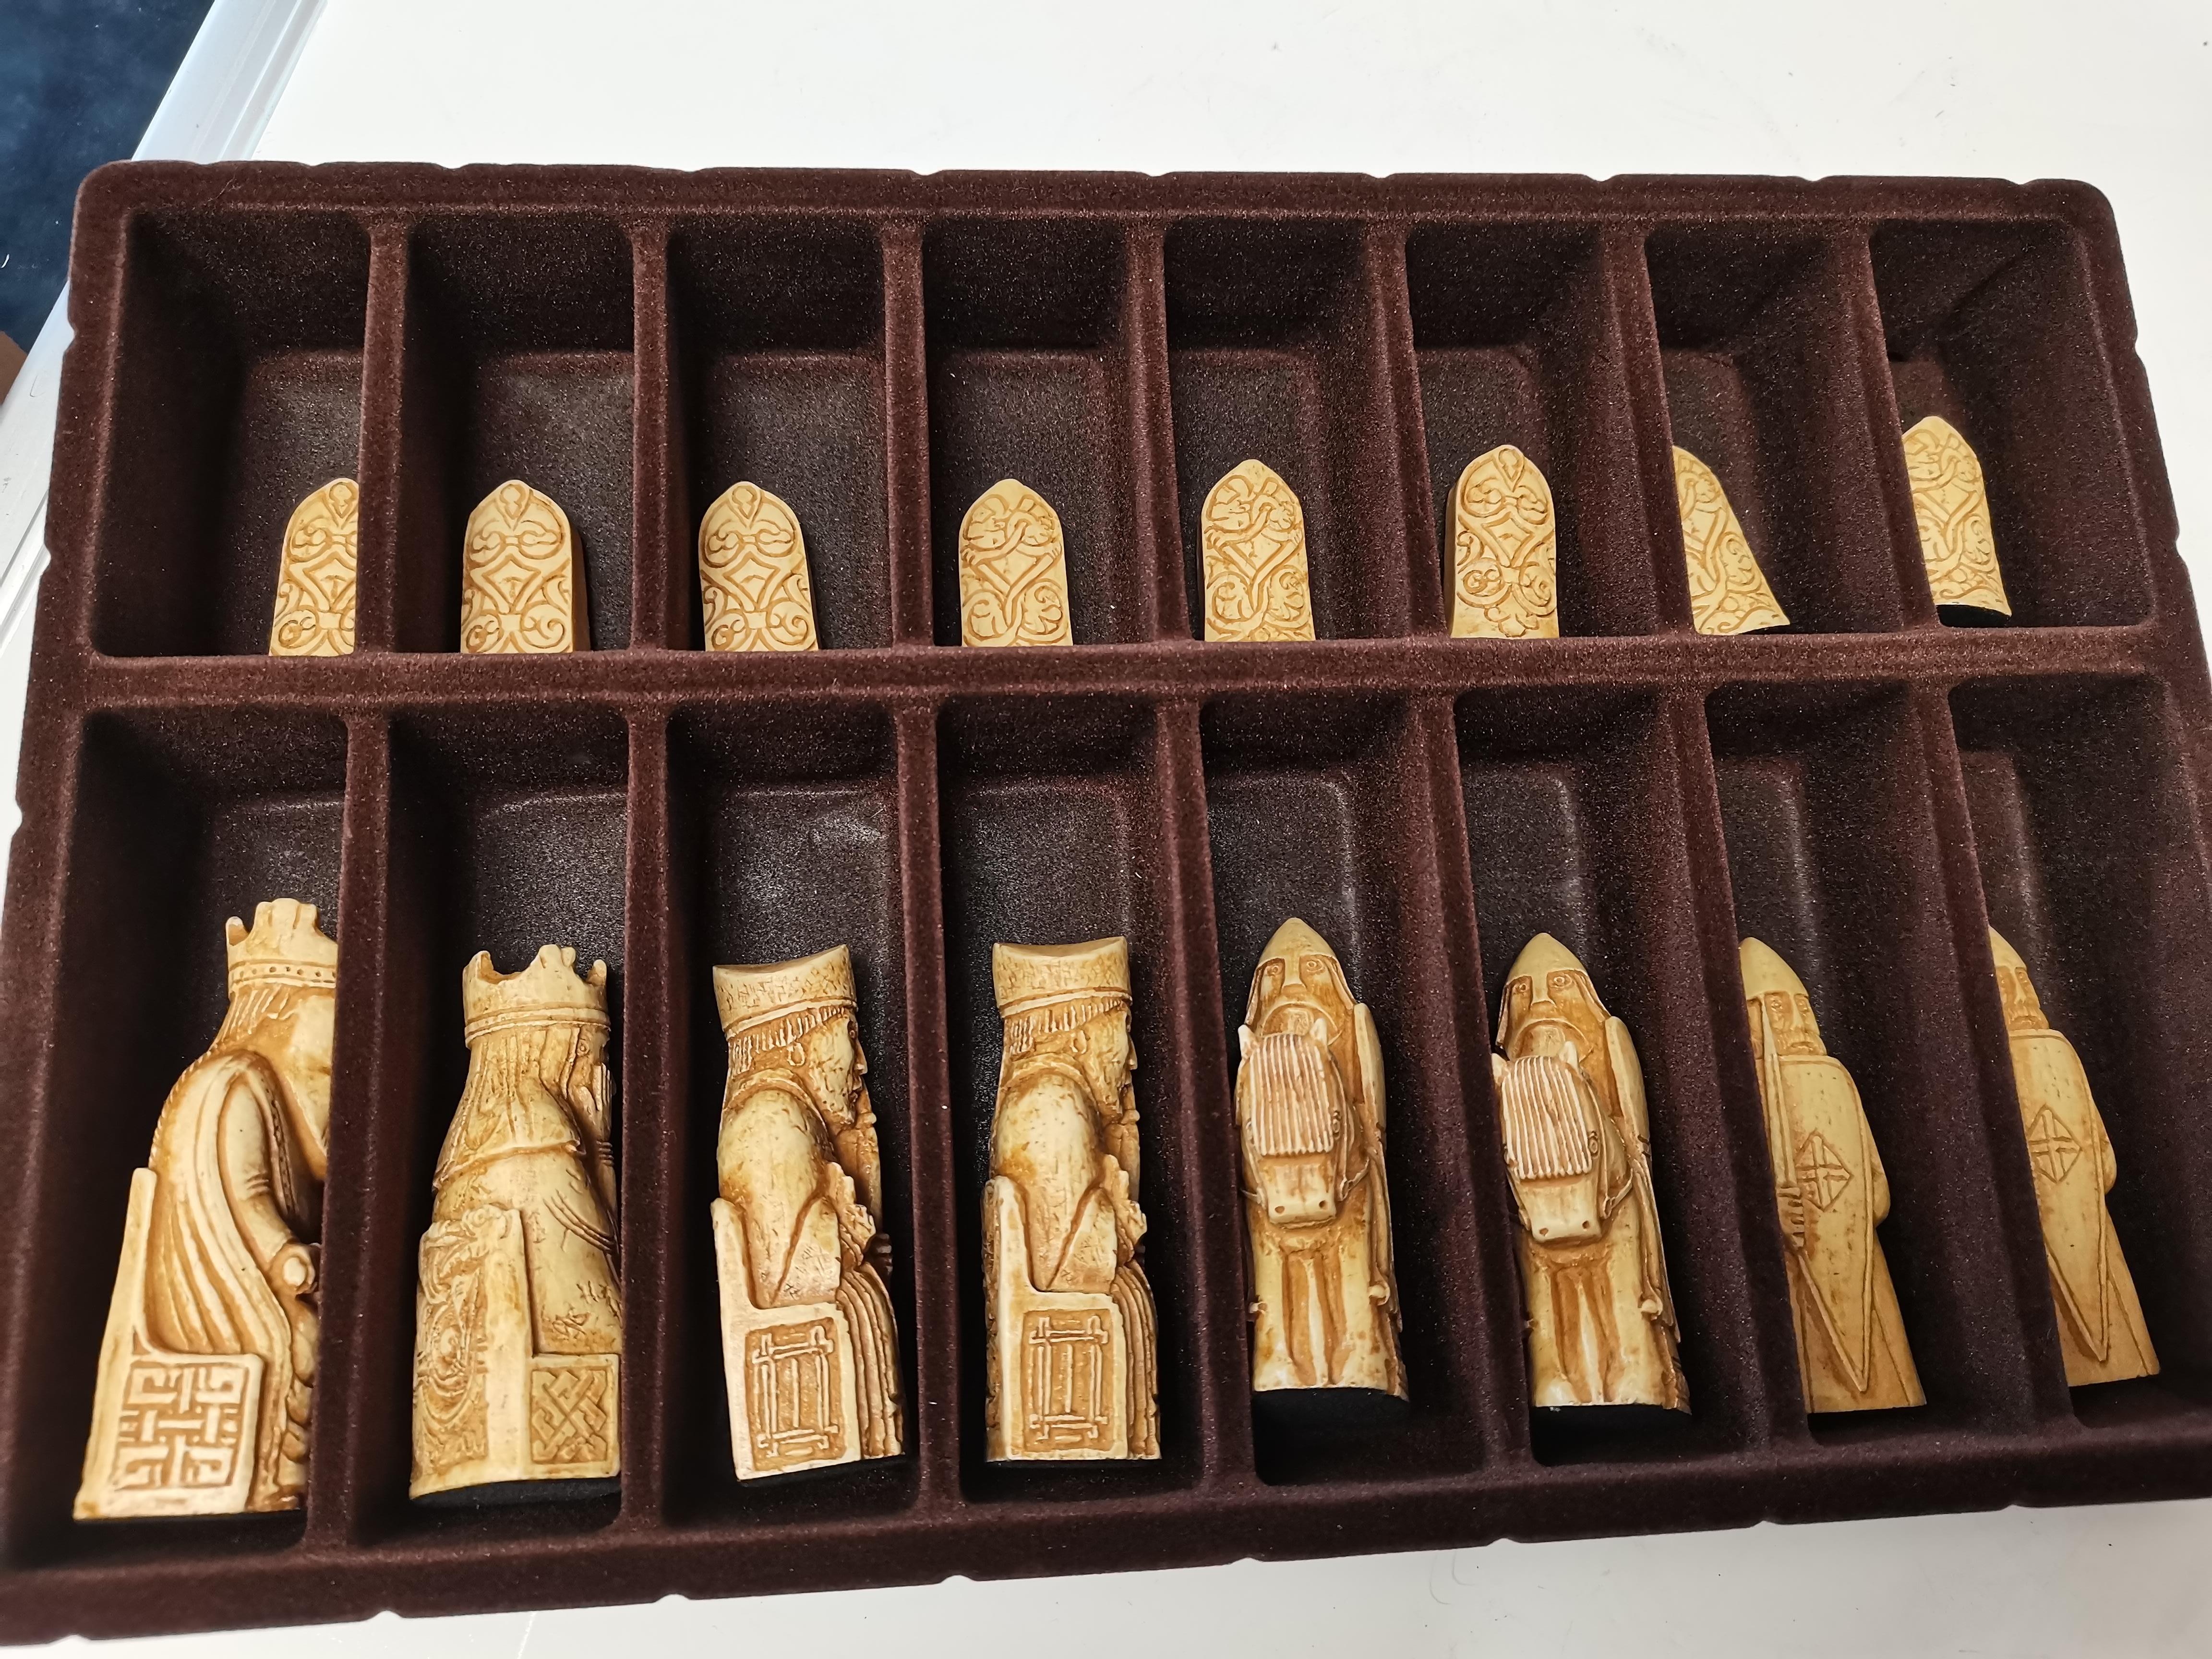 Studio Anne Carlton Chess set - Reproductions of Isle of Lewis Chessmen - Image 4 of 6